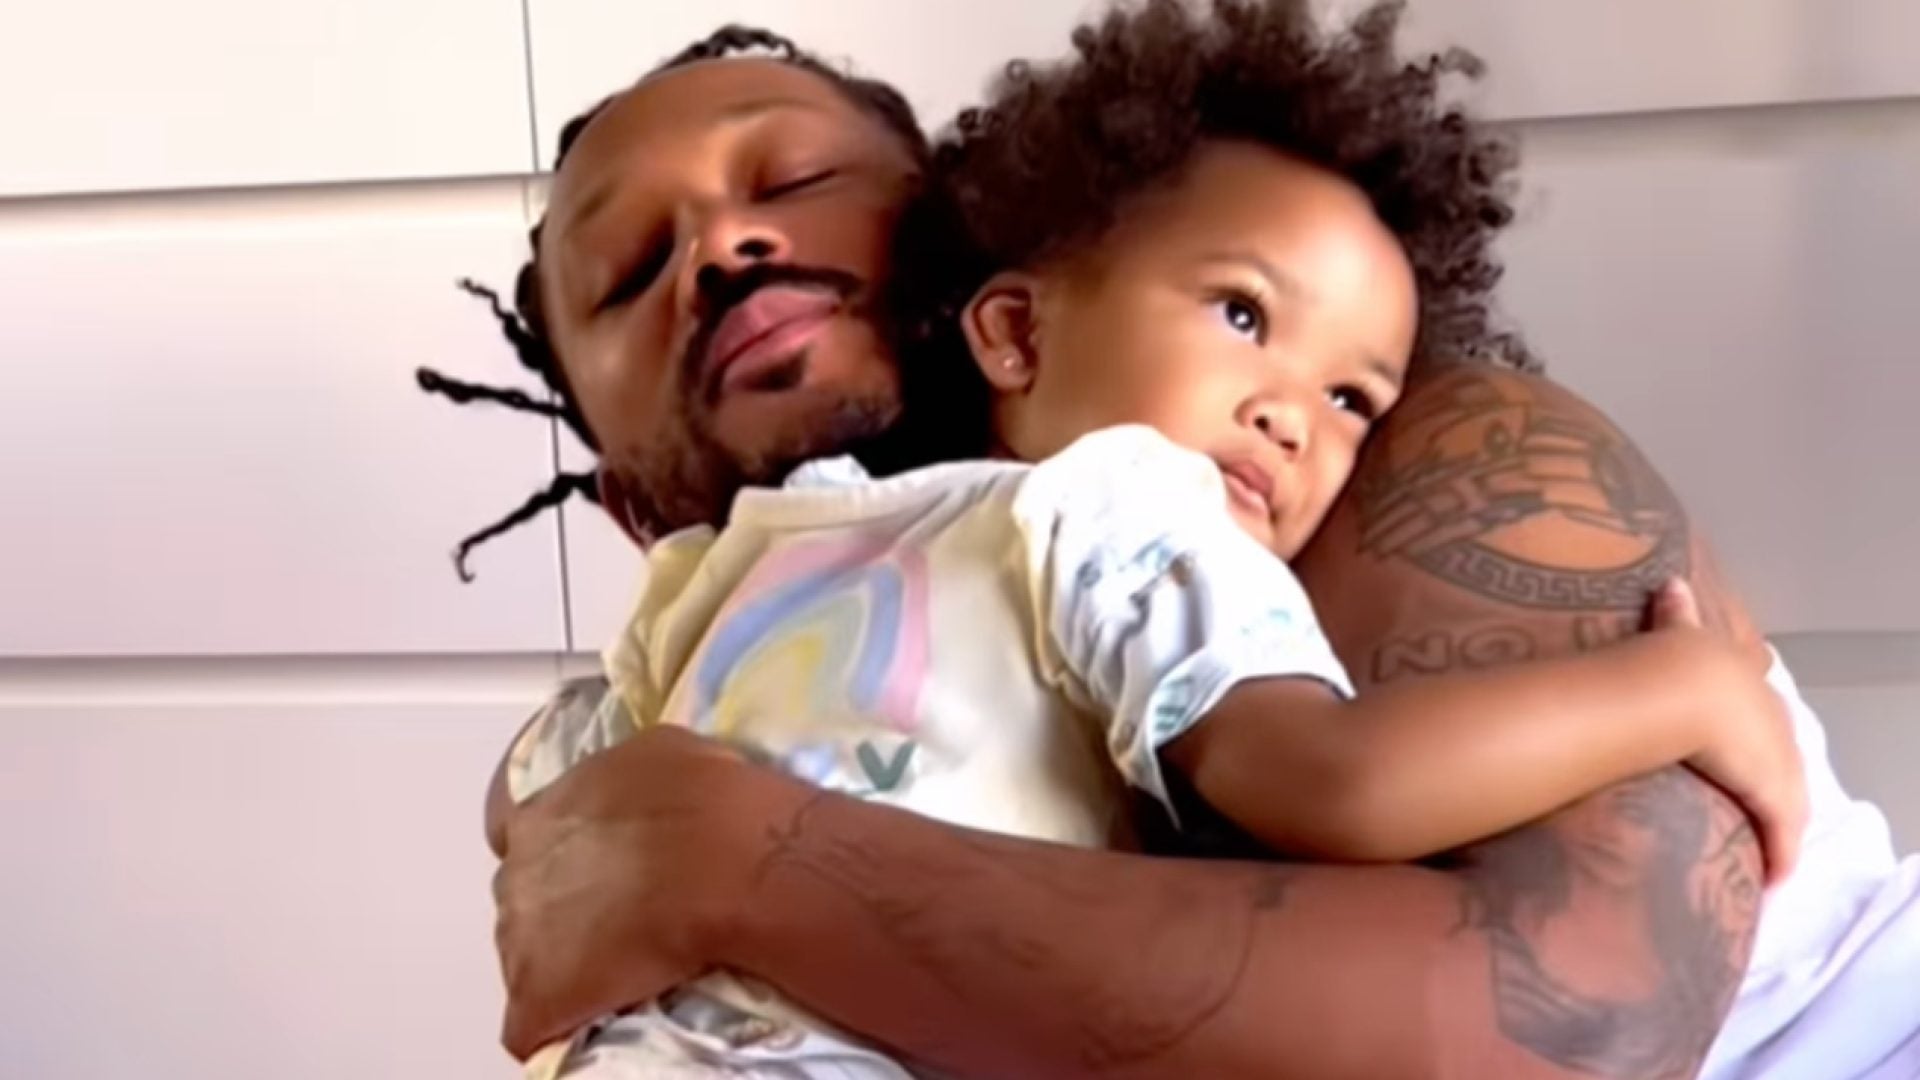 Romeo Miller Reveals His 2-Year-Old Has Type 1 Diabetes: 'My Daughter Is One Of The Younger Cases To Be Diagnosed'